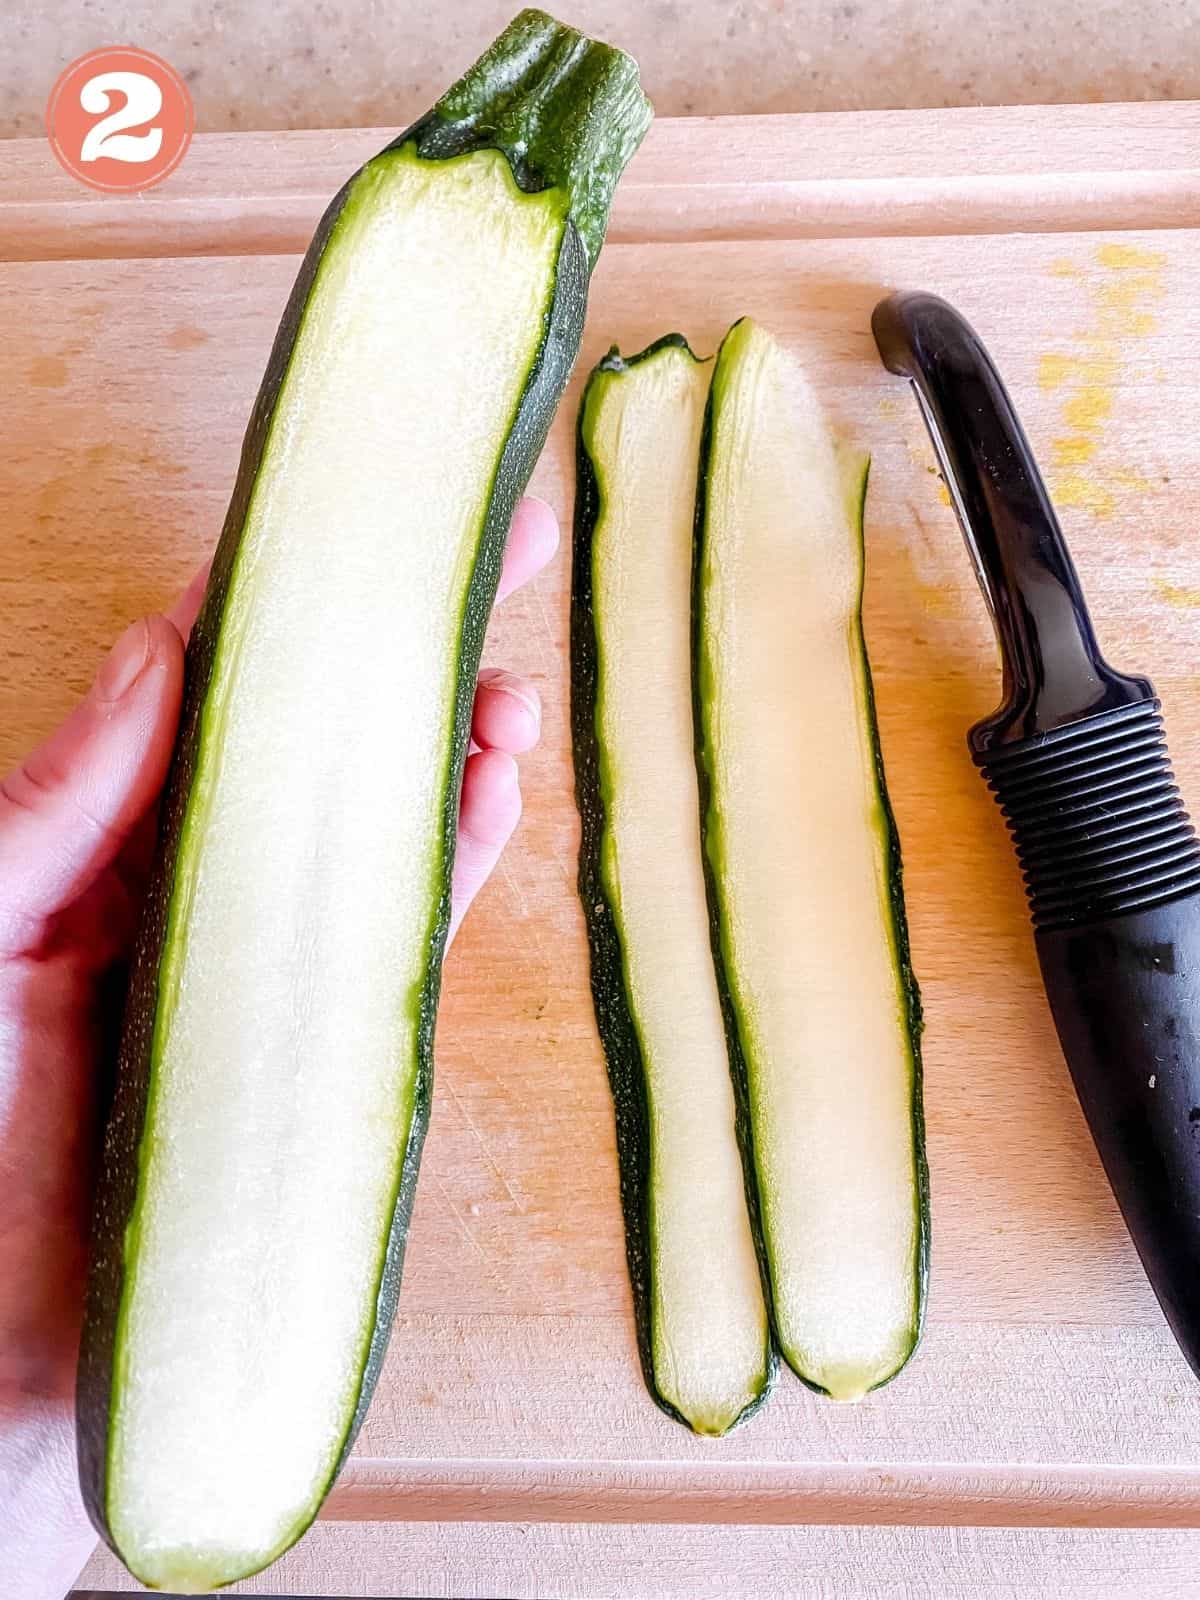 peeled zucchini and someone holding a zucchini above a wooden chopping board.